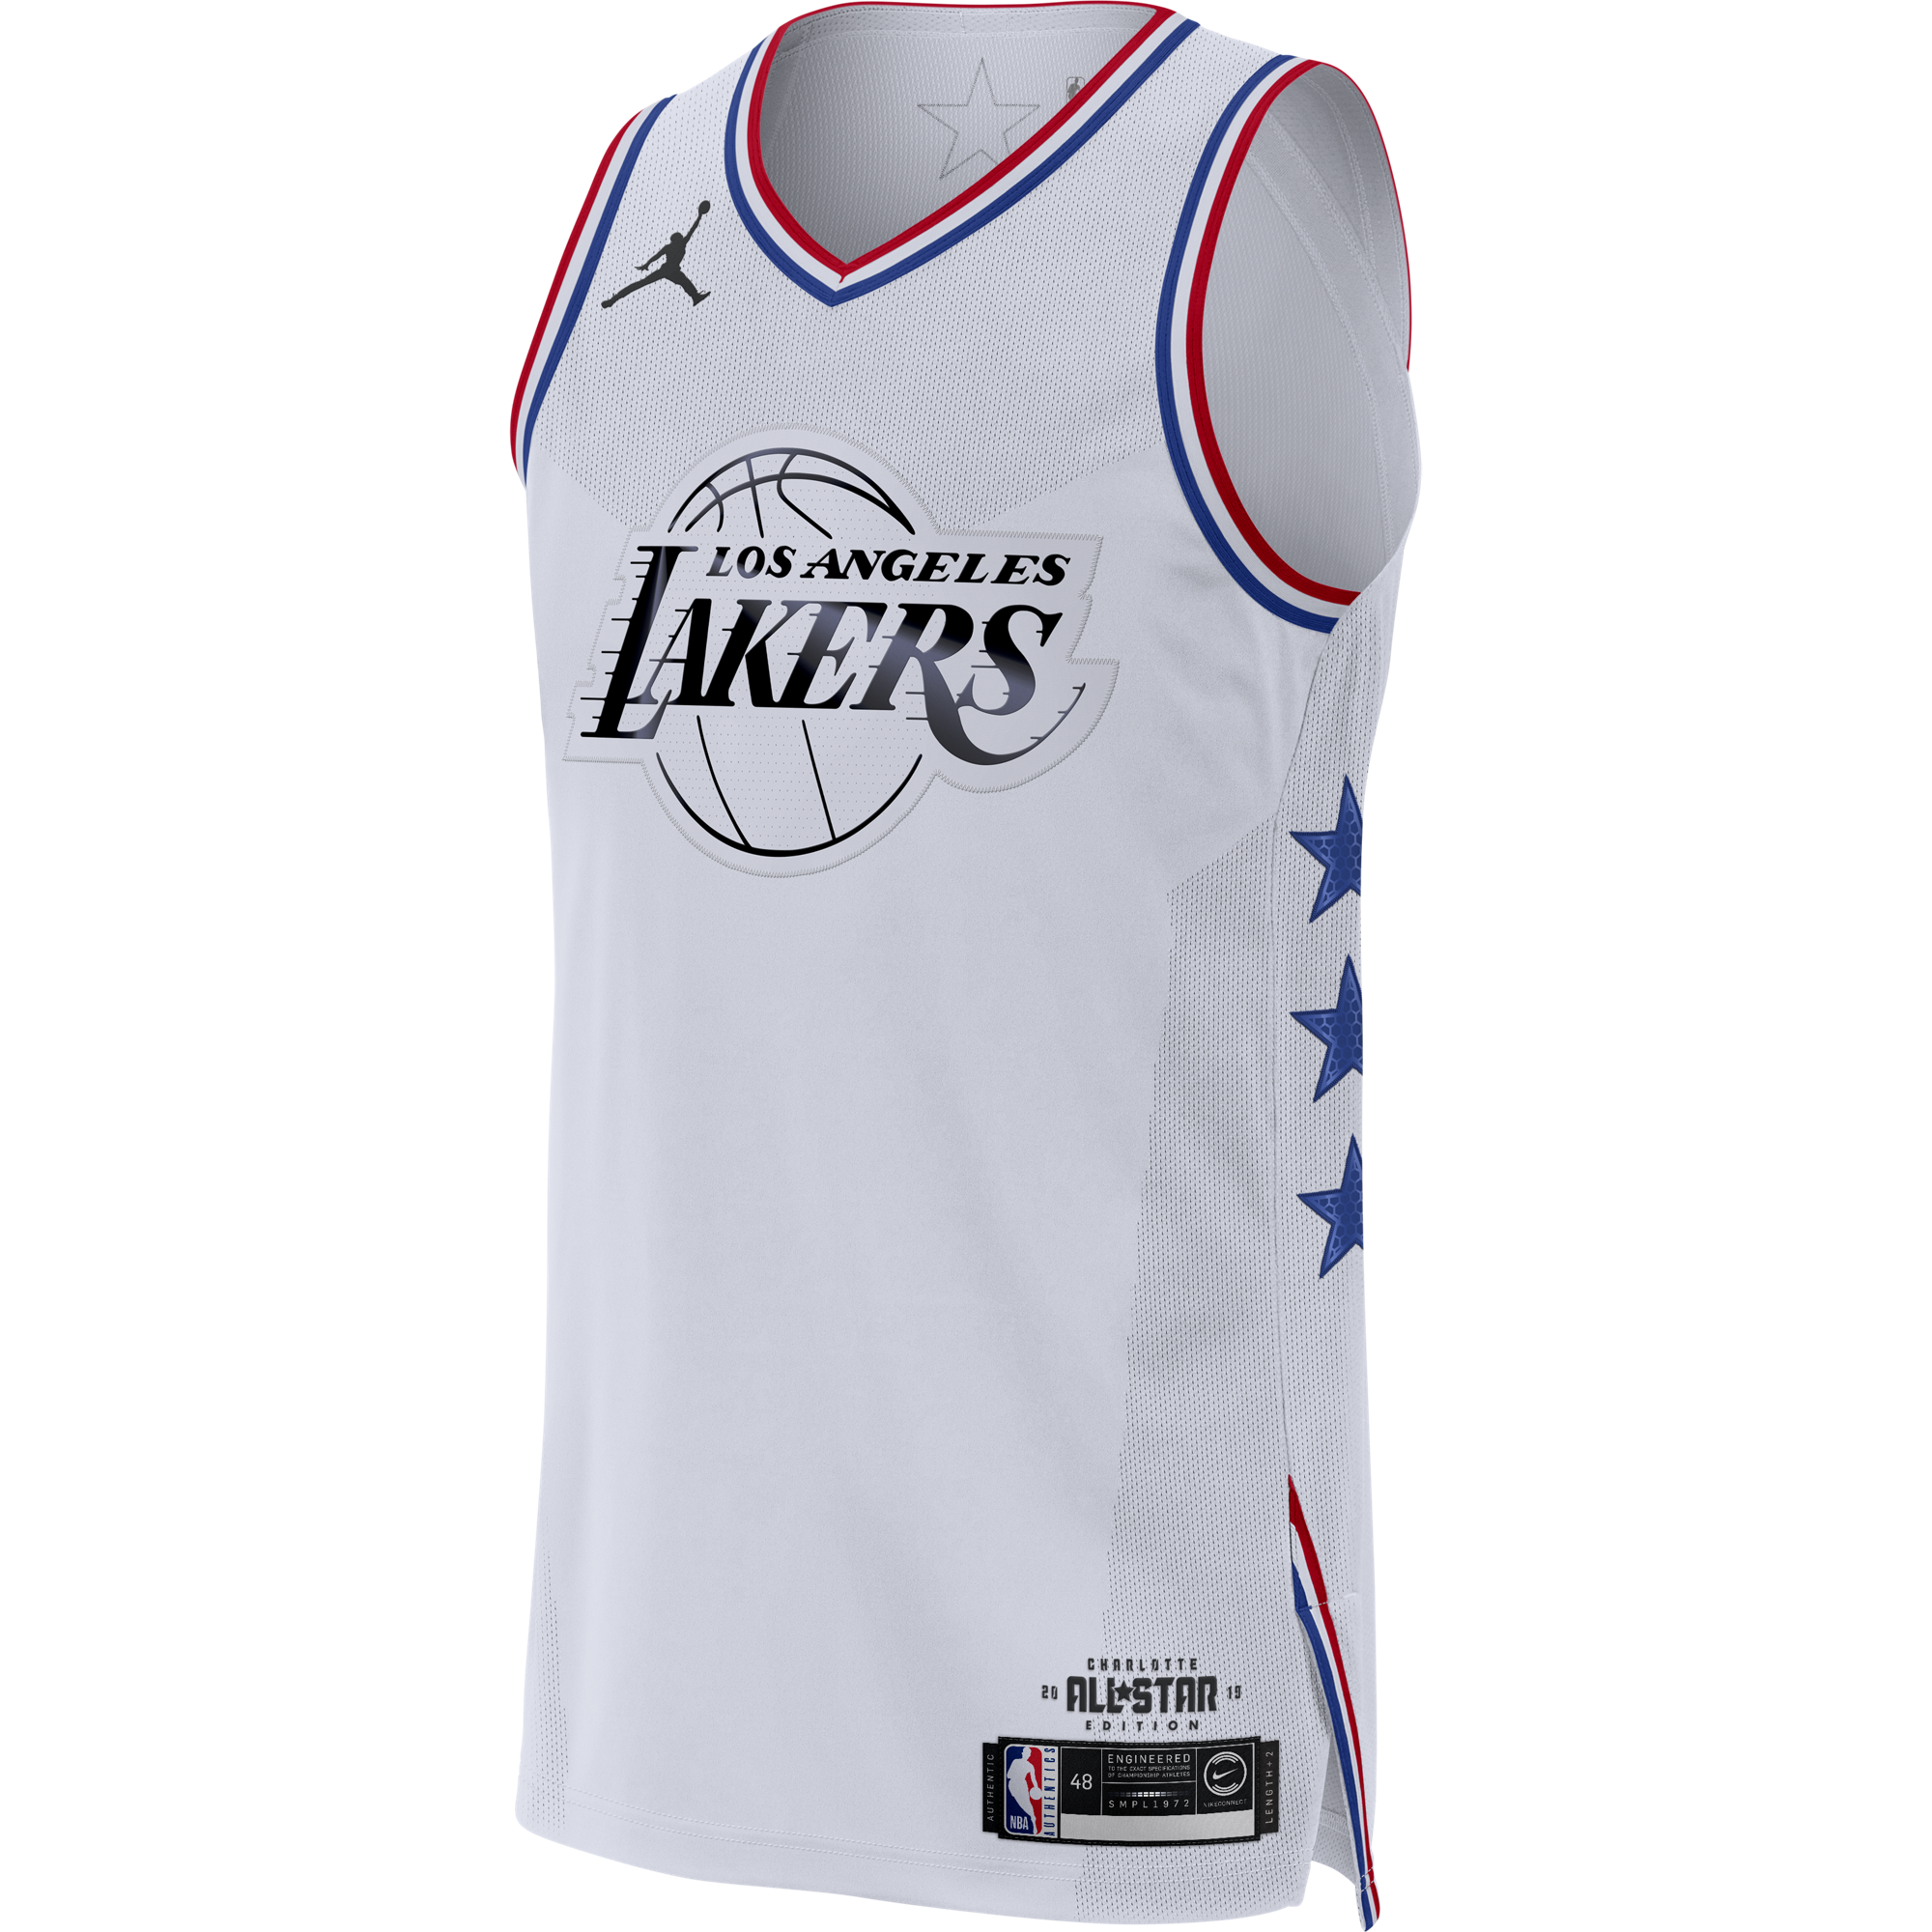 lebron james jersey all star 2019